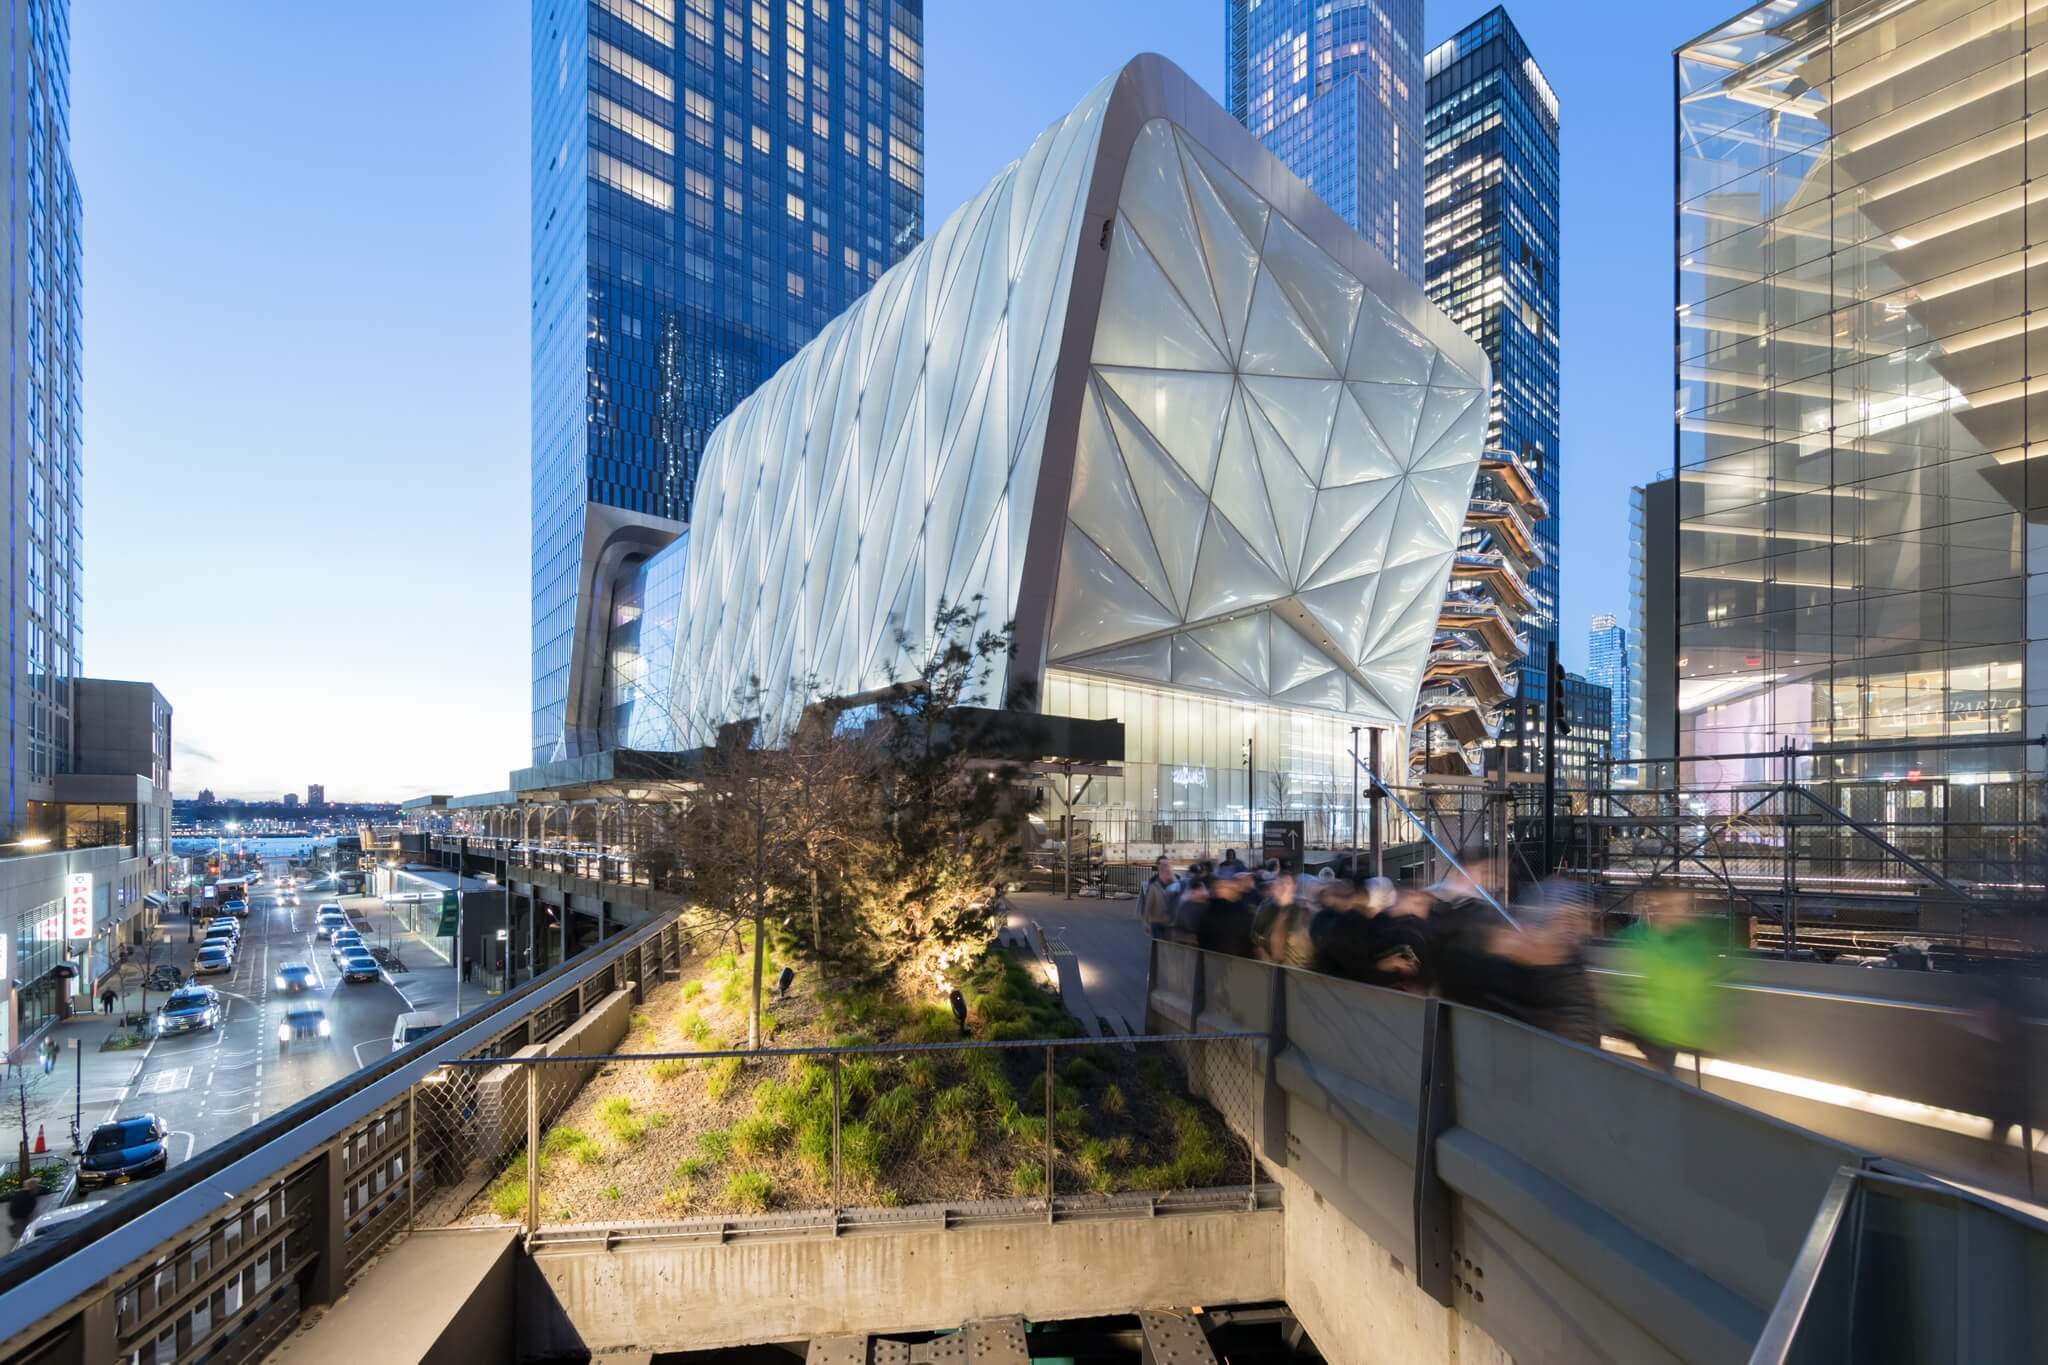 The Kinetic Architecture Of New York S Newest Cultural Institution Artlecture